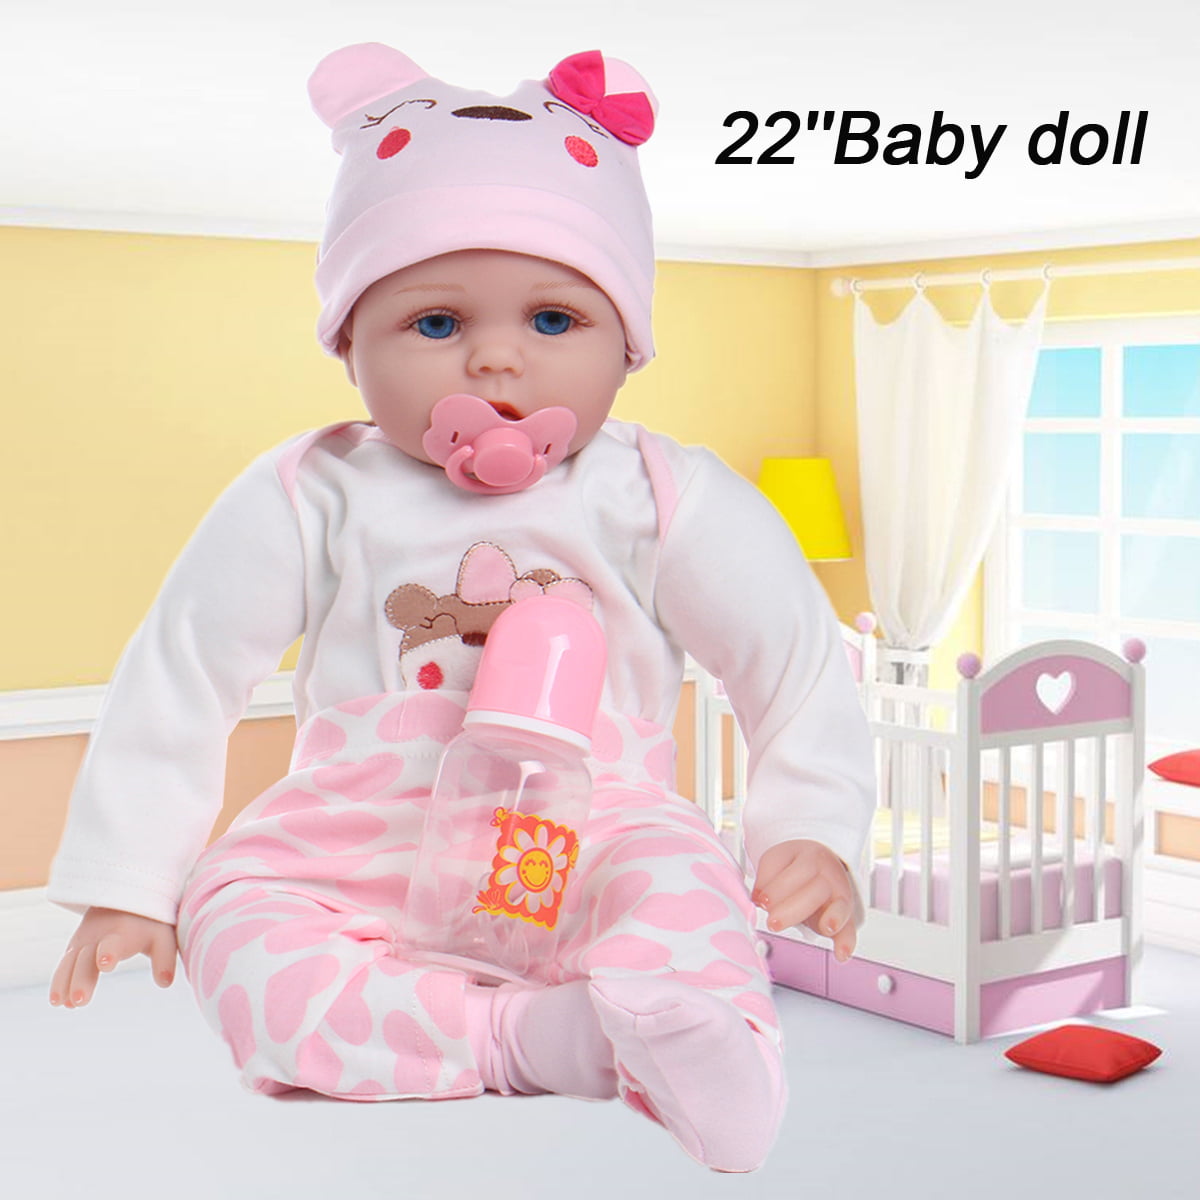 Reborn Baby Sound Box Simulation Doll Sound Device Call Mother Cry Laugh